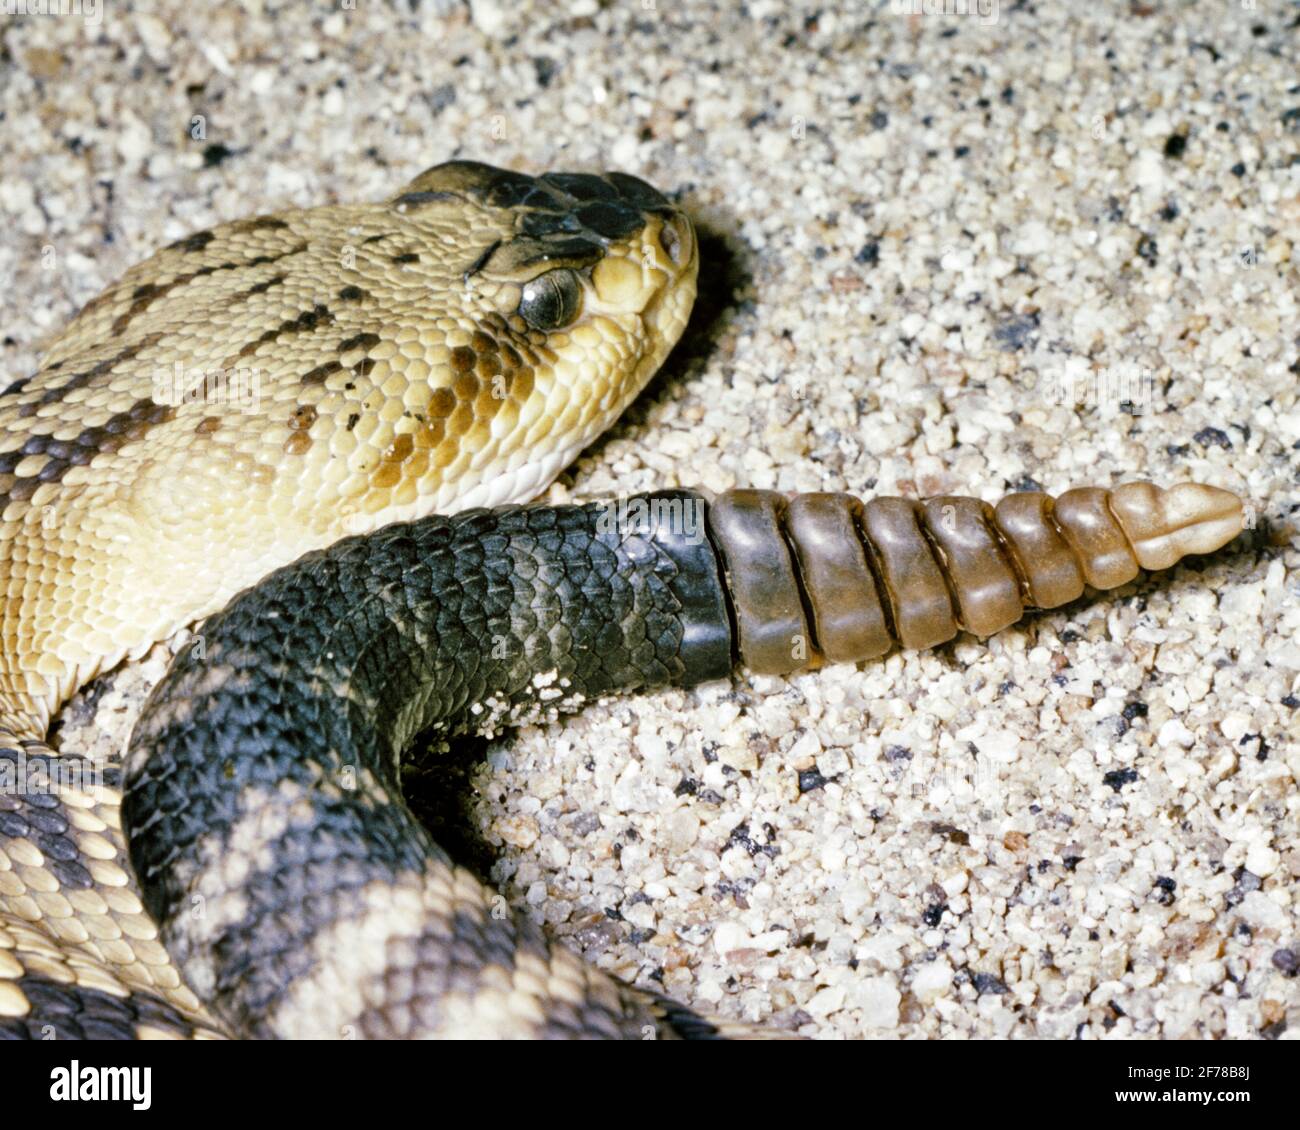 1970s SHOWING PIT VIPER SHAPE HEAD AND RATTLES ON TAIL OF A BLACK-TAILED RATTLESNAKE Crotalus molossus LYING IN SAND - kz575 LAN001 HARS PREDATOR CARNIVOROUS INTERLOCKED OLD FASHIONED RATTLESNAKE REPTILE REPTILES SNAKES SOUTHWESTERN Stock Photo